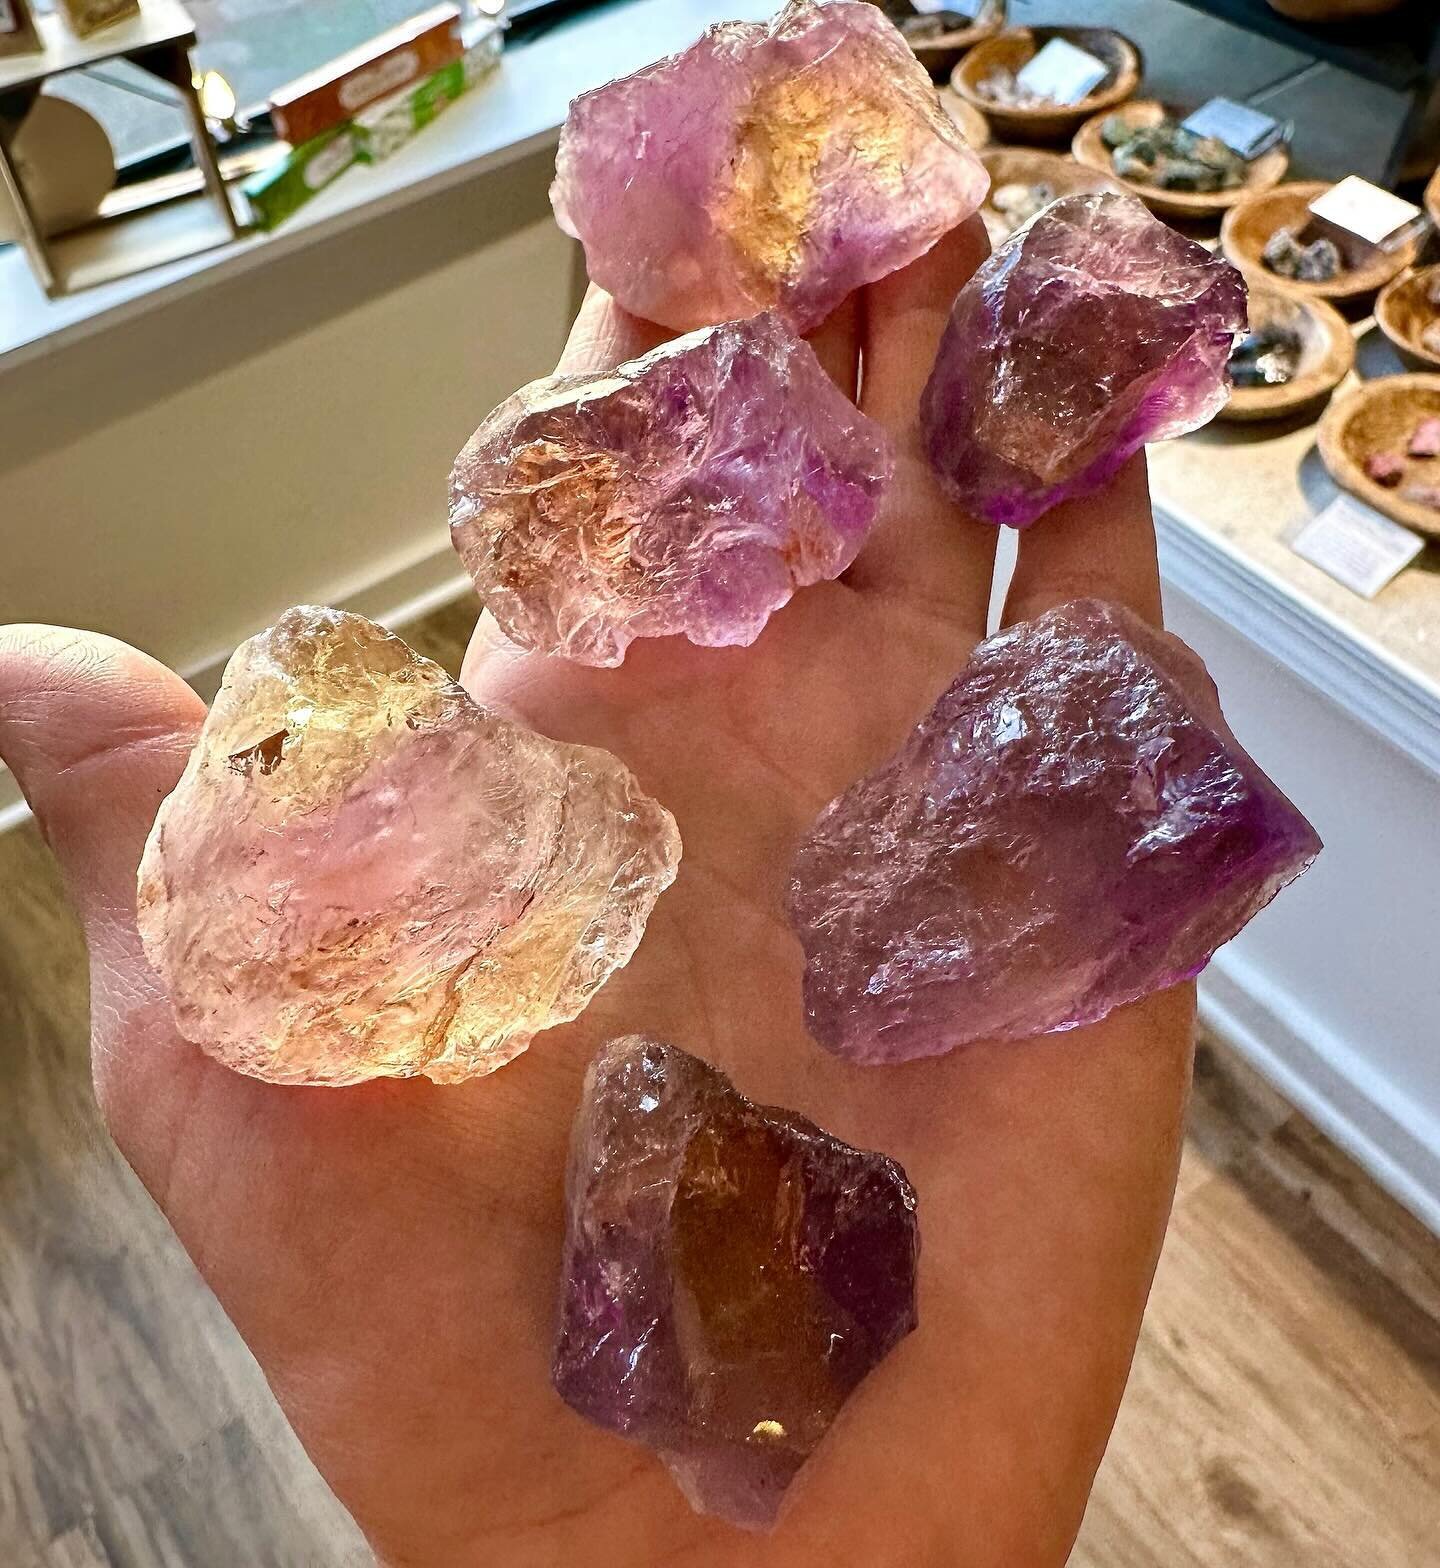 Ametrine is a bicolor quartz that has zones of amethyst (purple) and citrine (yellow) within the same crystal. It forms when quartz crystals grow together with different iron impurities and oxidation states as well specific temperature variations and